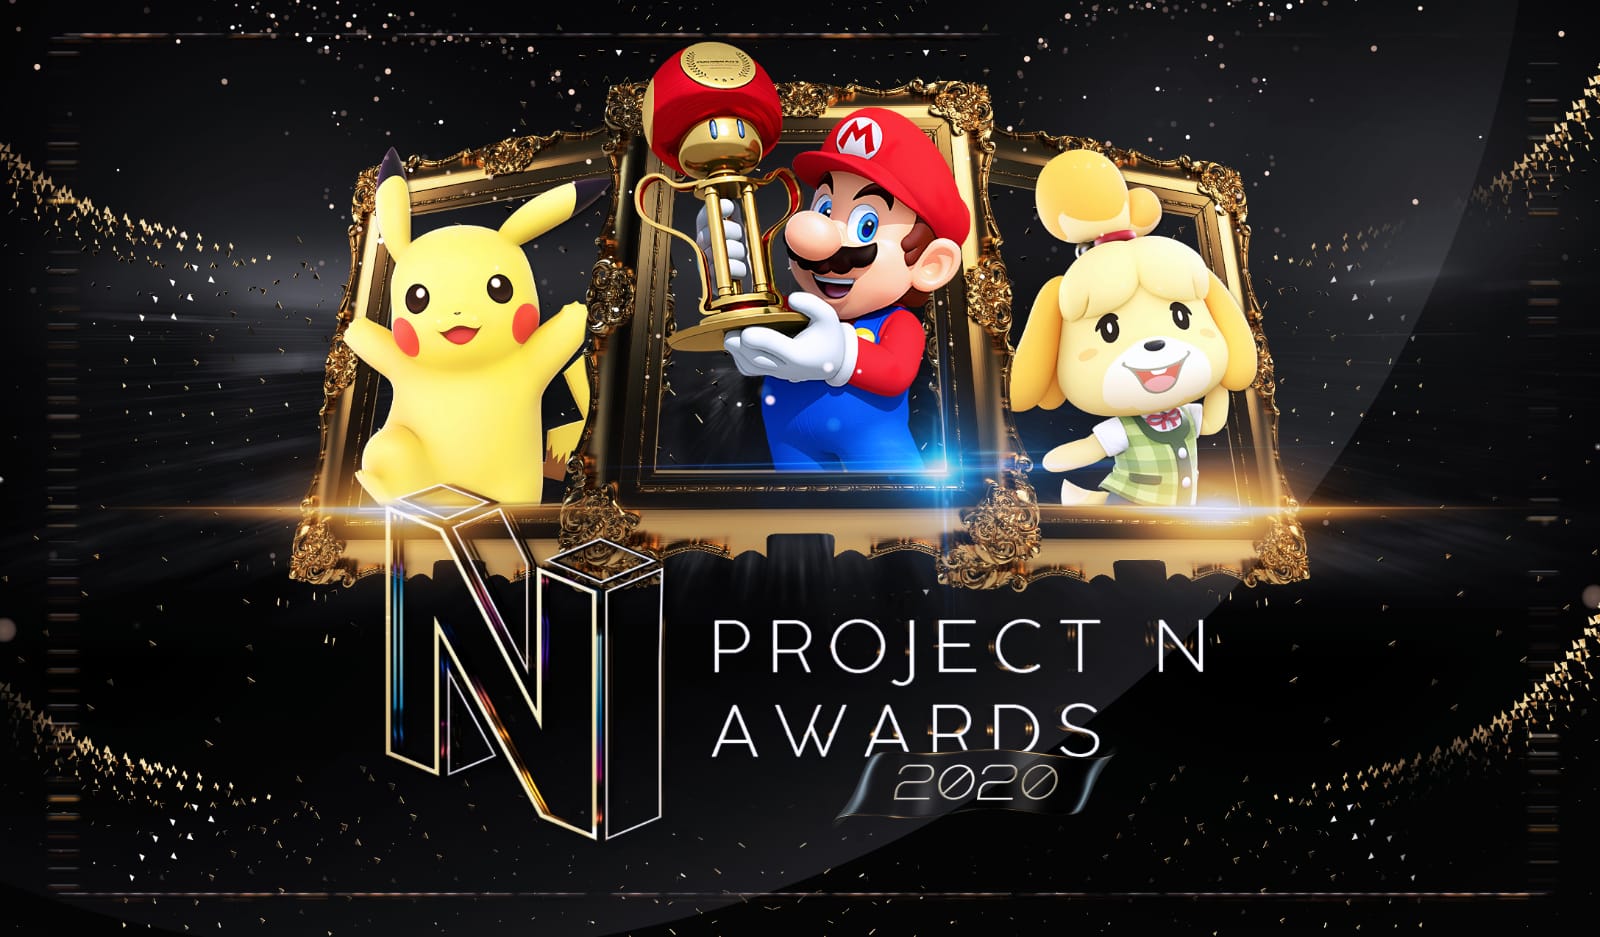 Project N Cast #26 - Project N Awards 2020